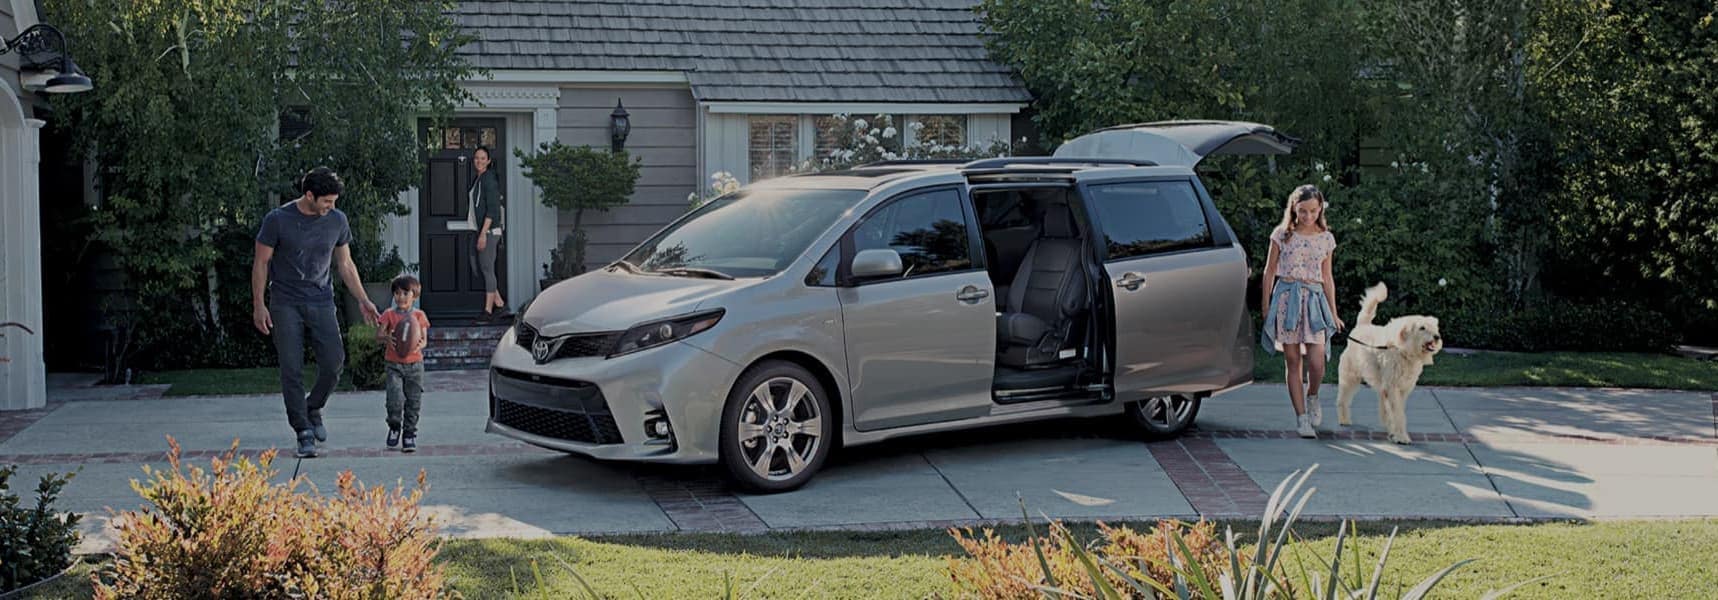 Family in driveway loading up toyota van